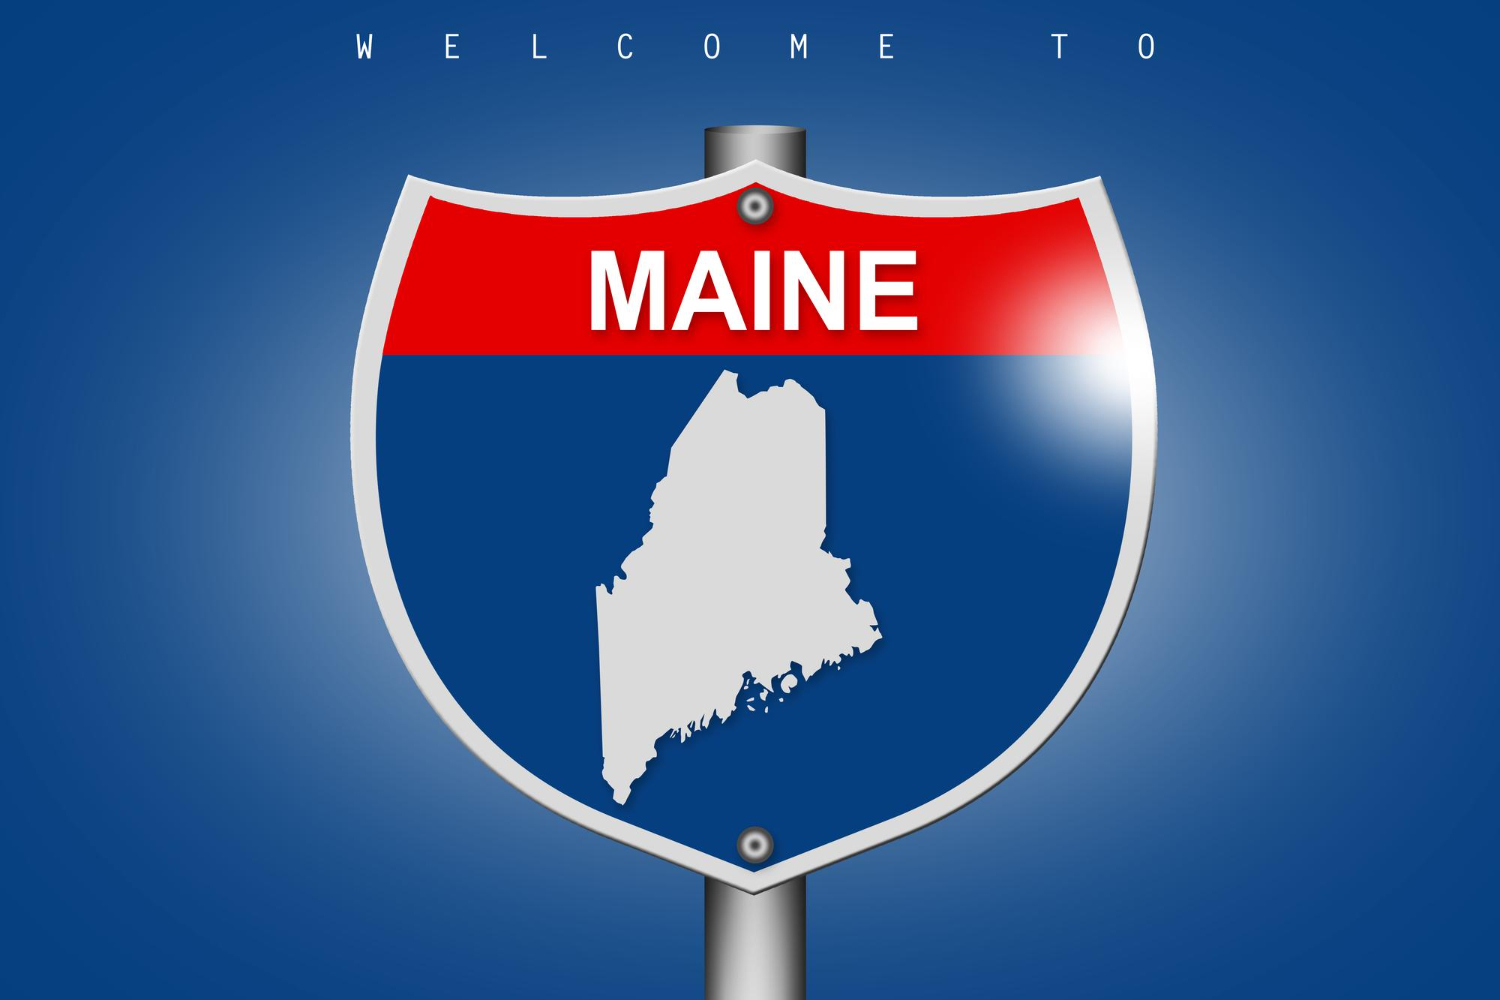 A welcome to Maine sign